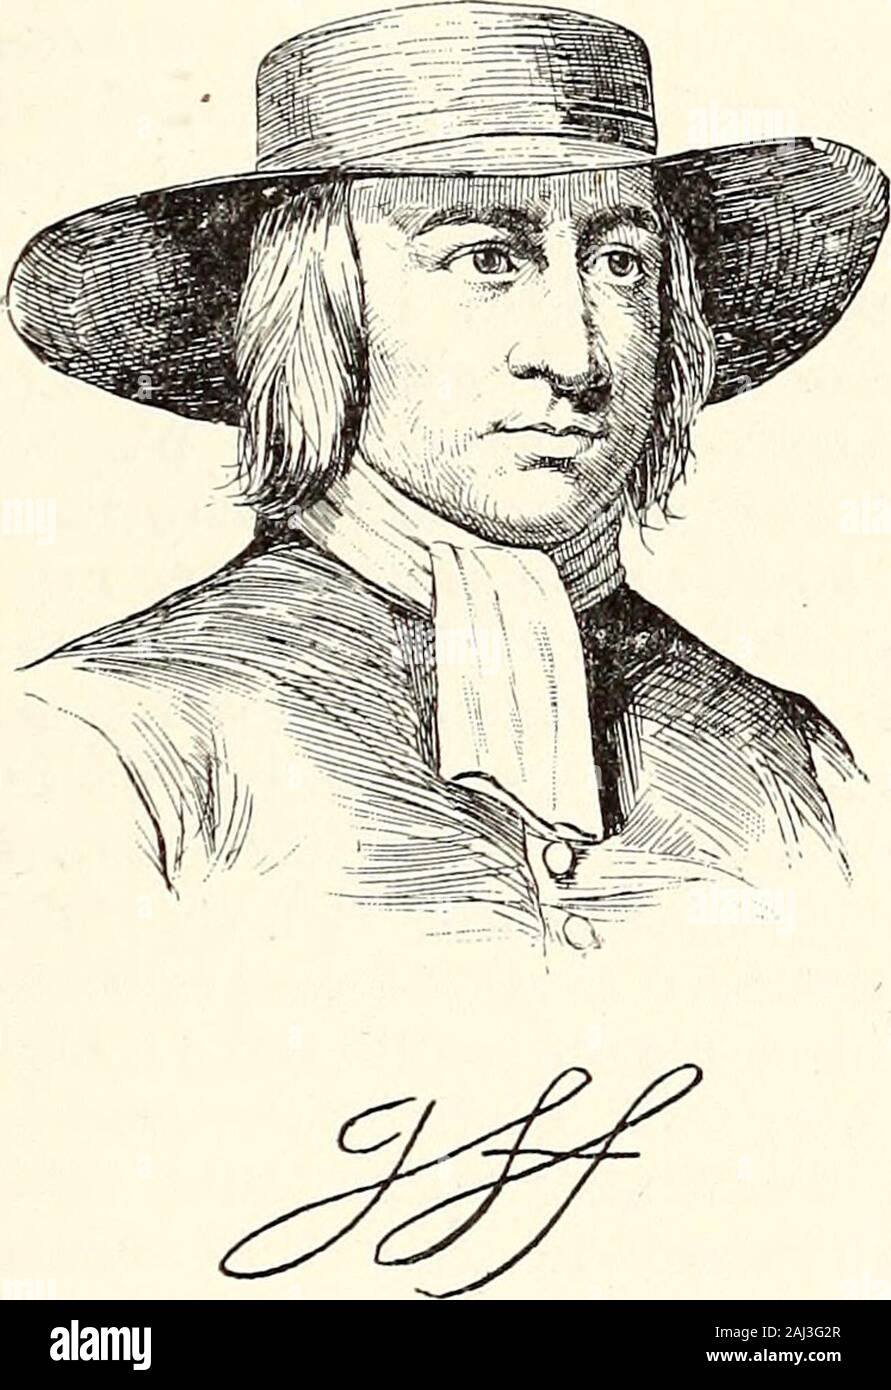 Appletons' cyclopædia of American biography . d in 1663-6 wasconfined in different prisons about three years. Theterm Quakers is said to have been applied to his fol-lowers for the first time at Derby in 1650, in conse-quence of his telling Justice Bennet to quake atthe word of the Lord. In 1669 he married thewidow of a Welsh judge who had often befriendedhim, and whose wife and daughters had become be-lievers in his teachings. In 1671 he sailed for theBarbadoes, where many joined his society. Whileat this place he drew up a paper setting forth thebelief of the Friends as to the fundamental do Stock Photo